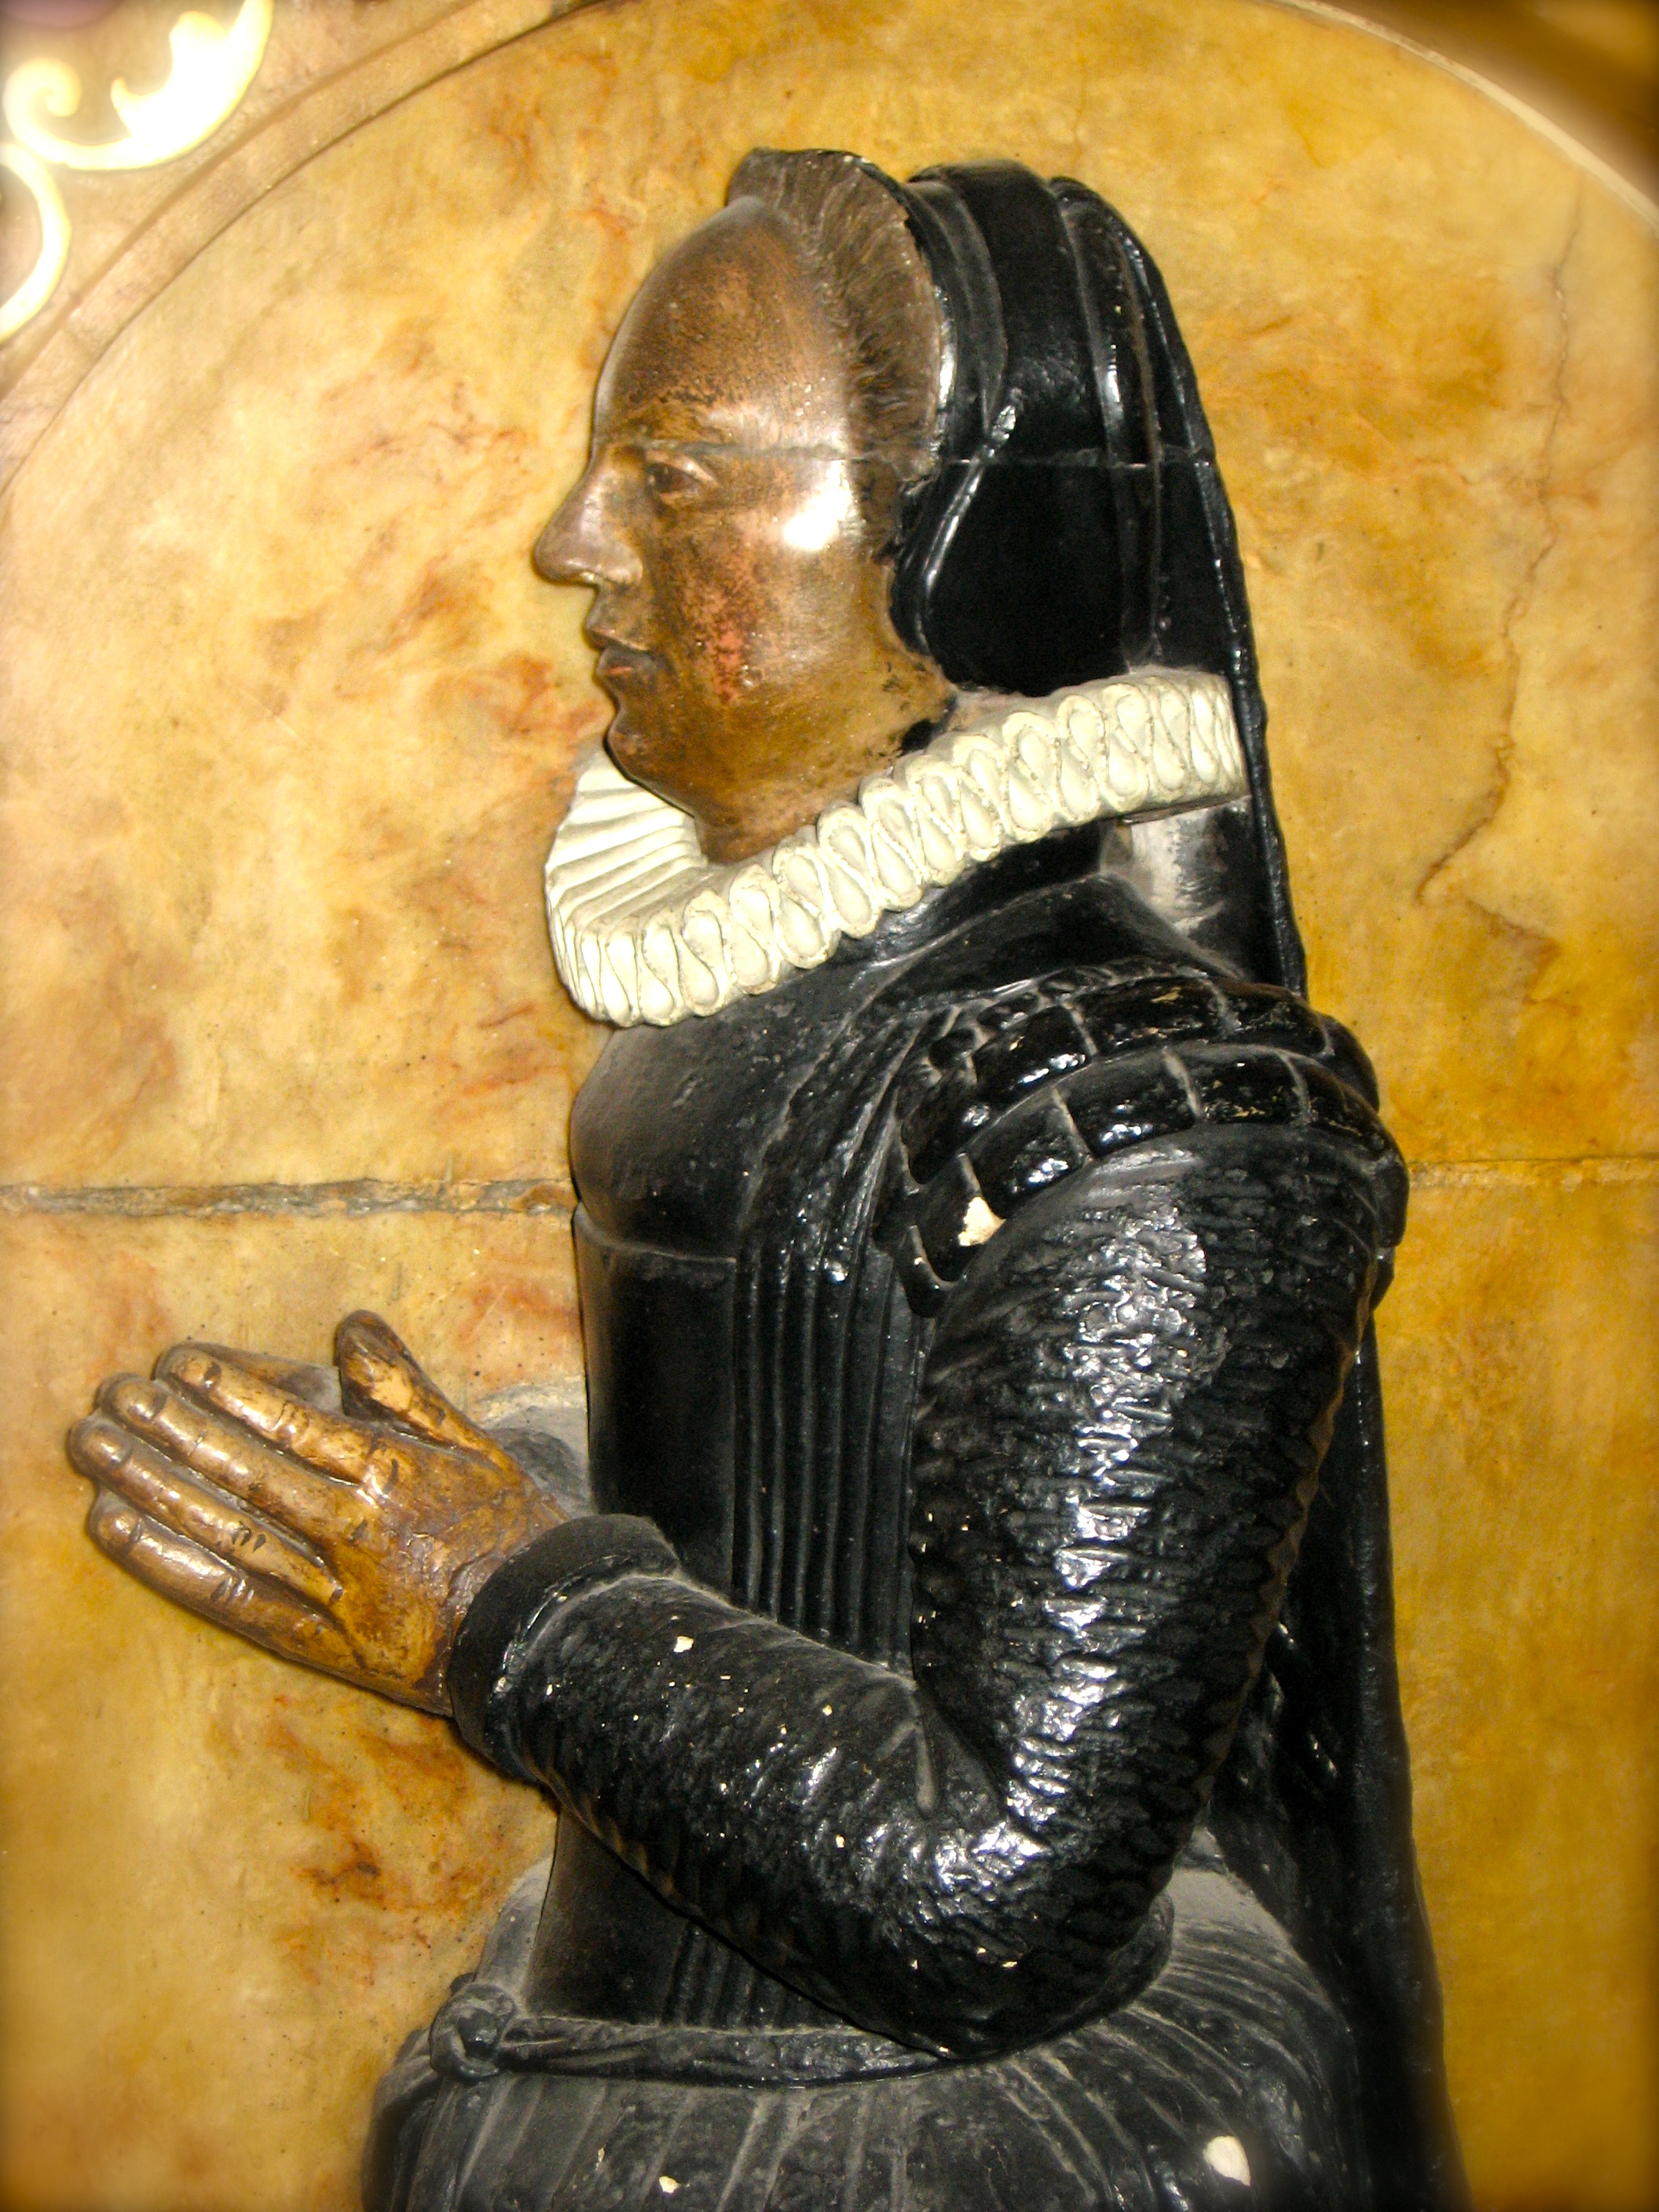 date unkown - Tomb Effigy at York Minster